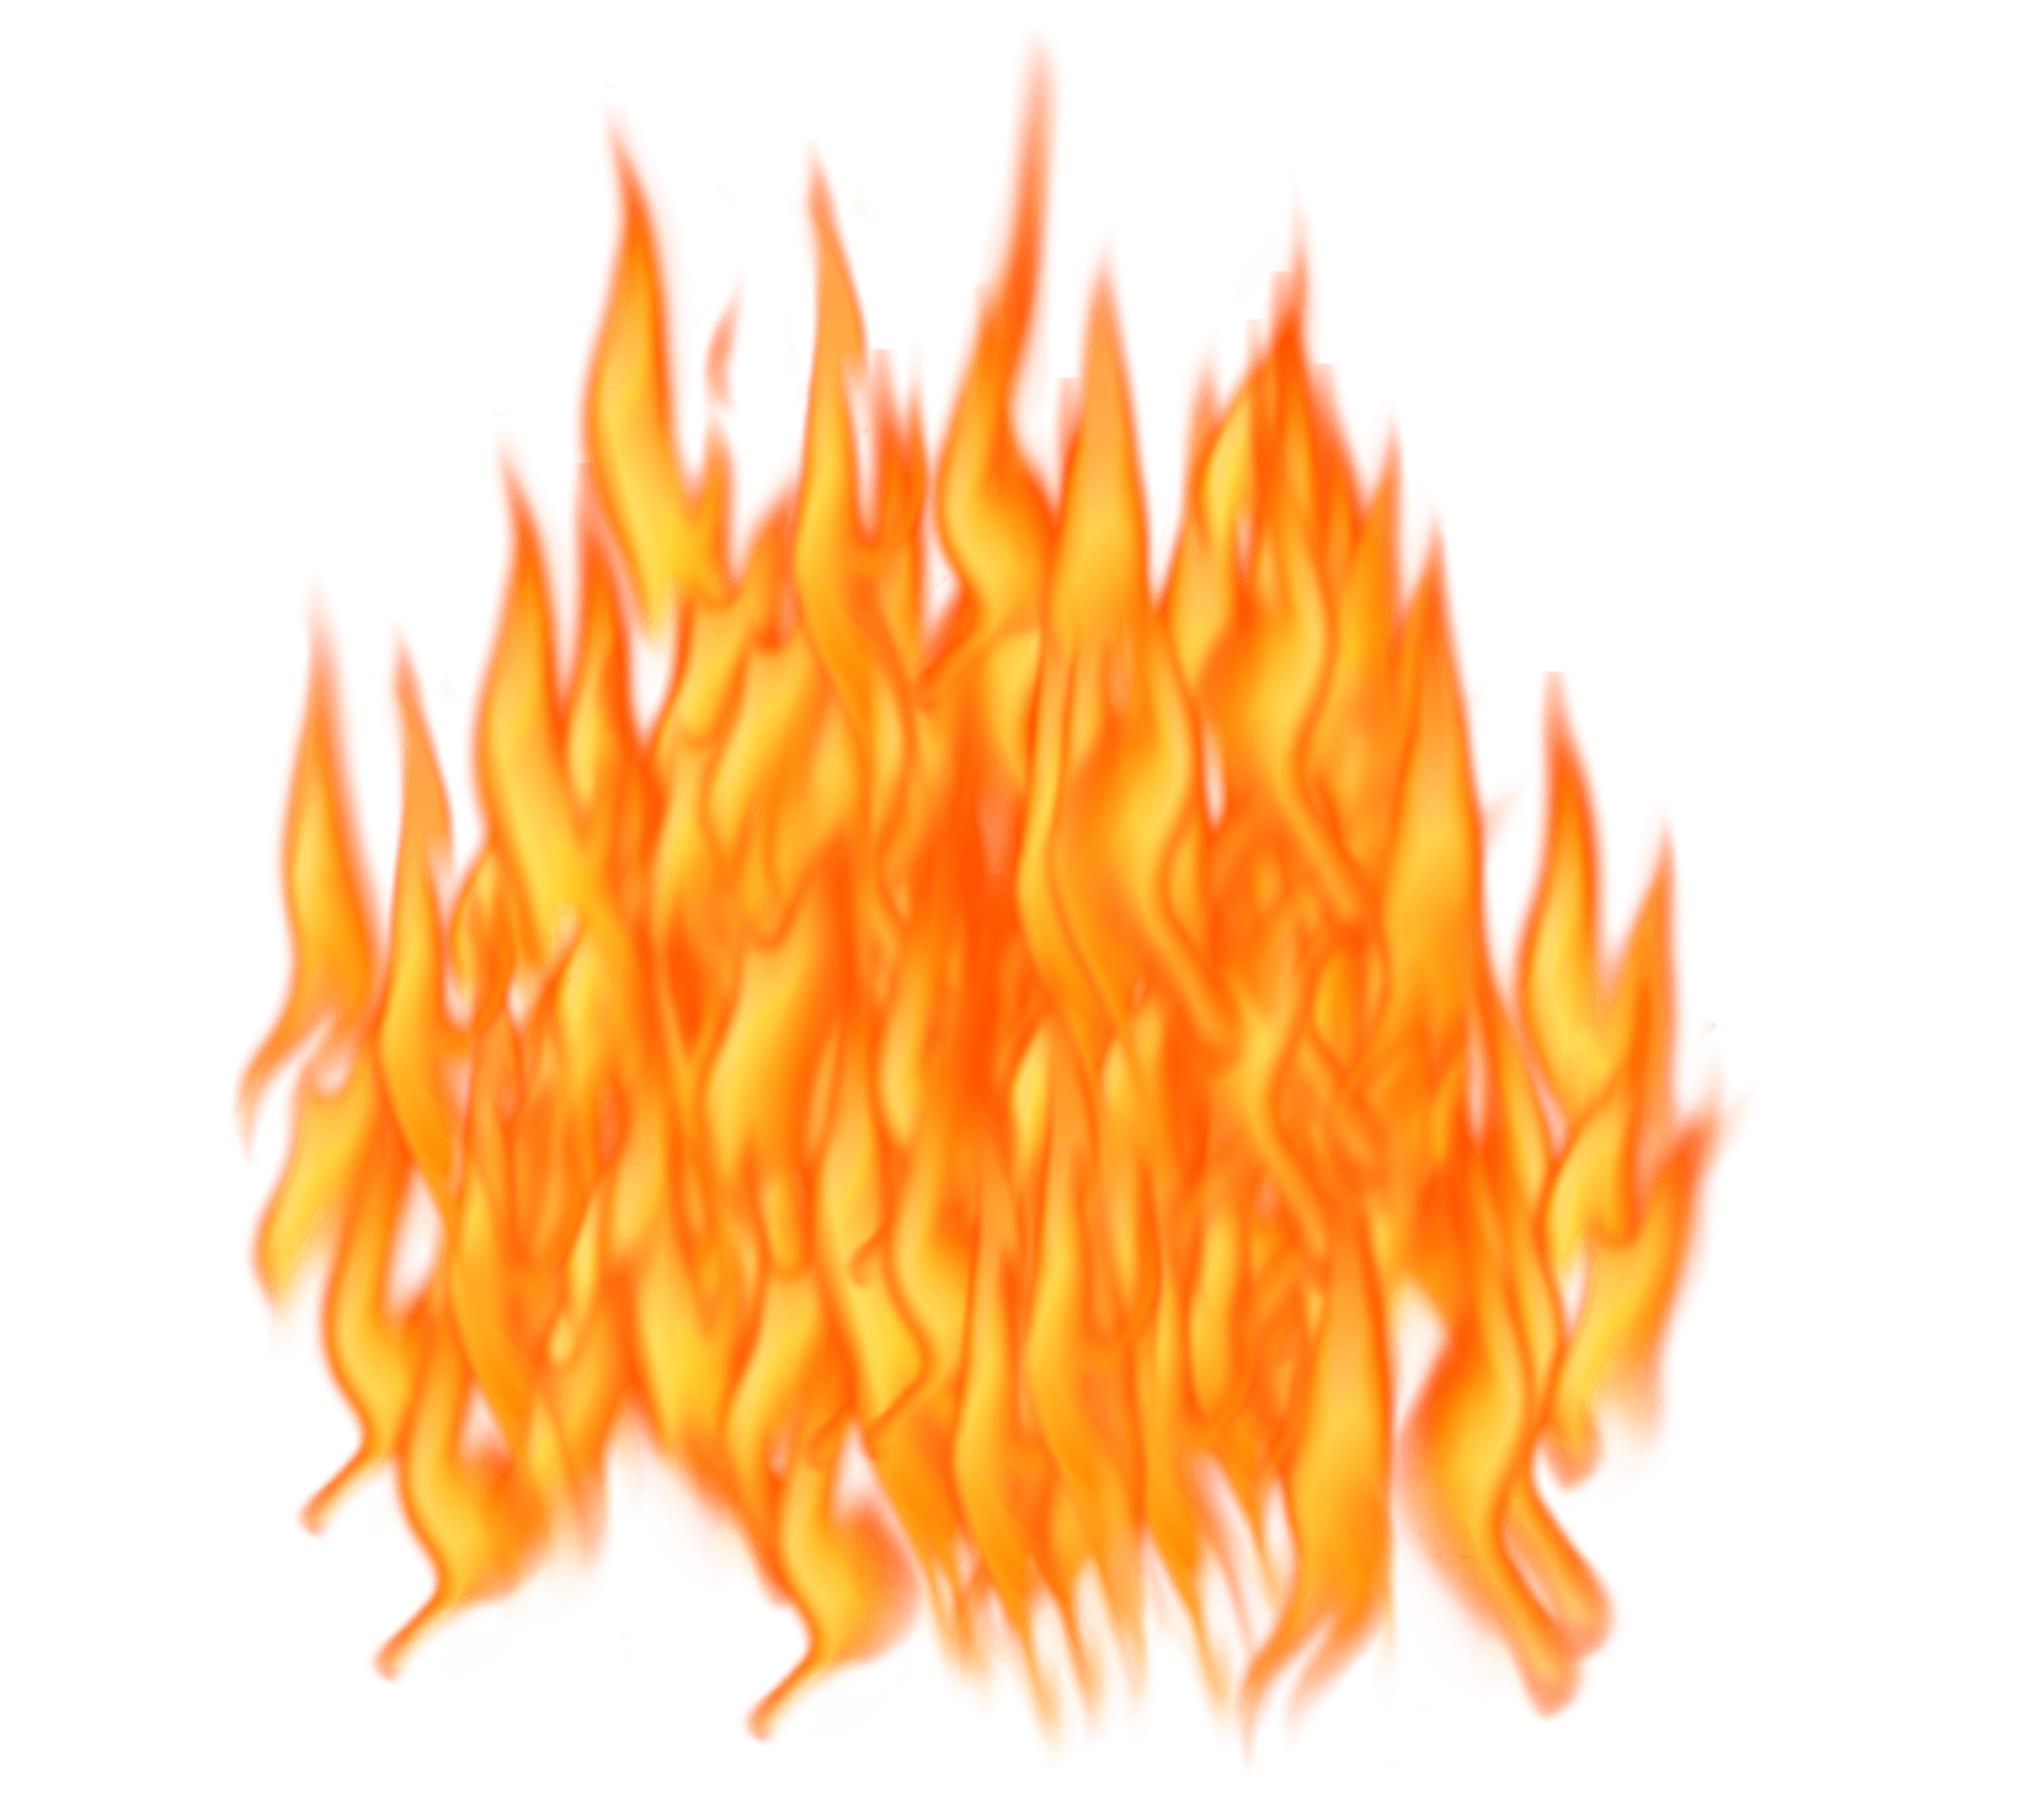 Flames clipart candle flame. Fire png images free